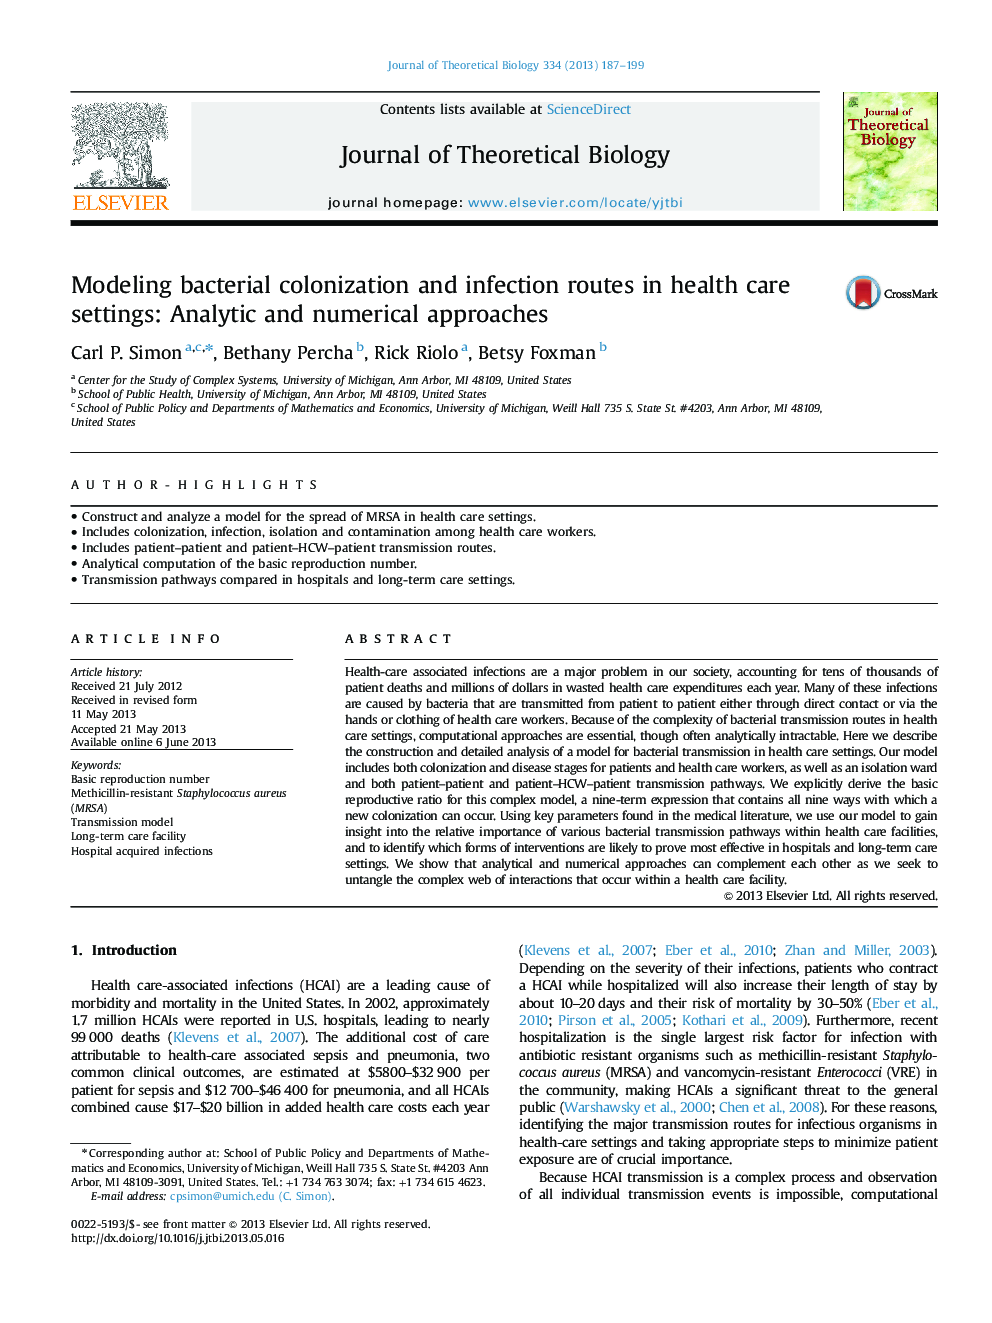 Modeling bacterial colonization and infection routes in health care settings: Analytic and numerical approaches